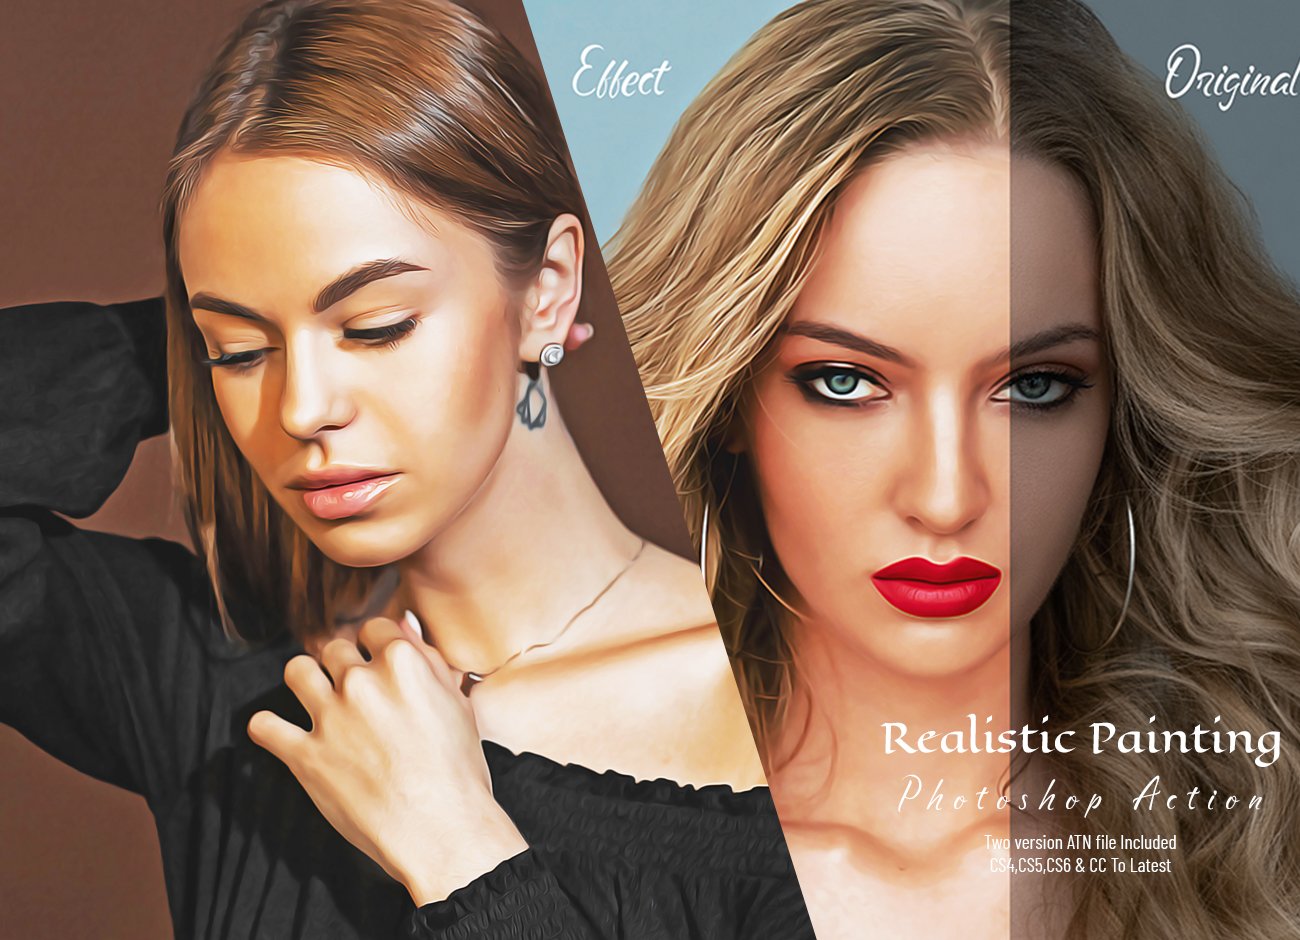 Realistic Painting Photoshop Actioncover image.